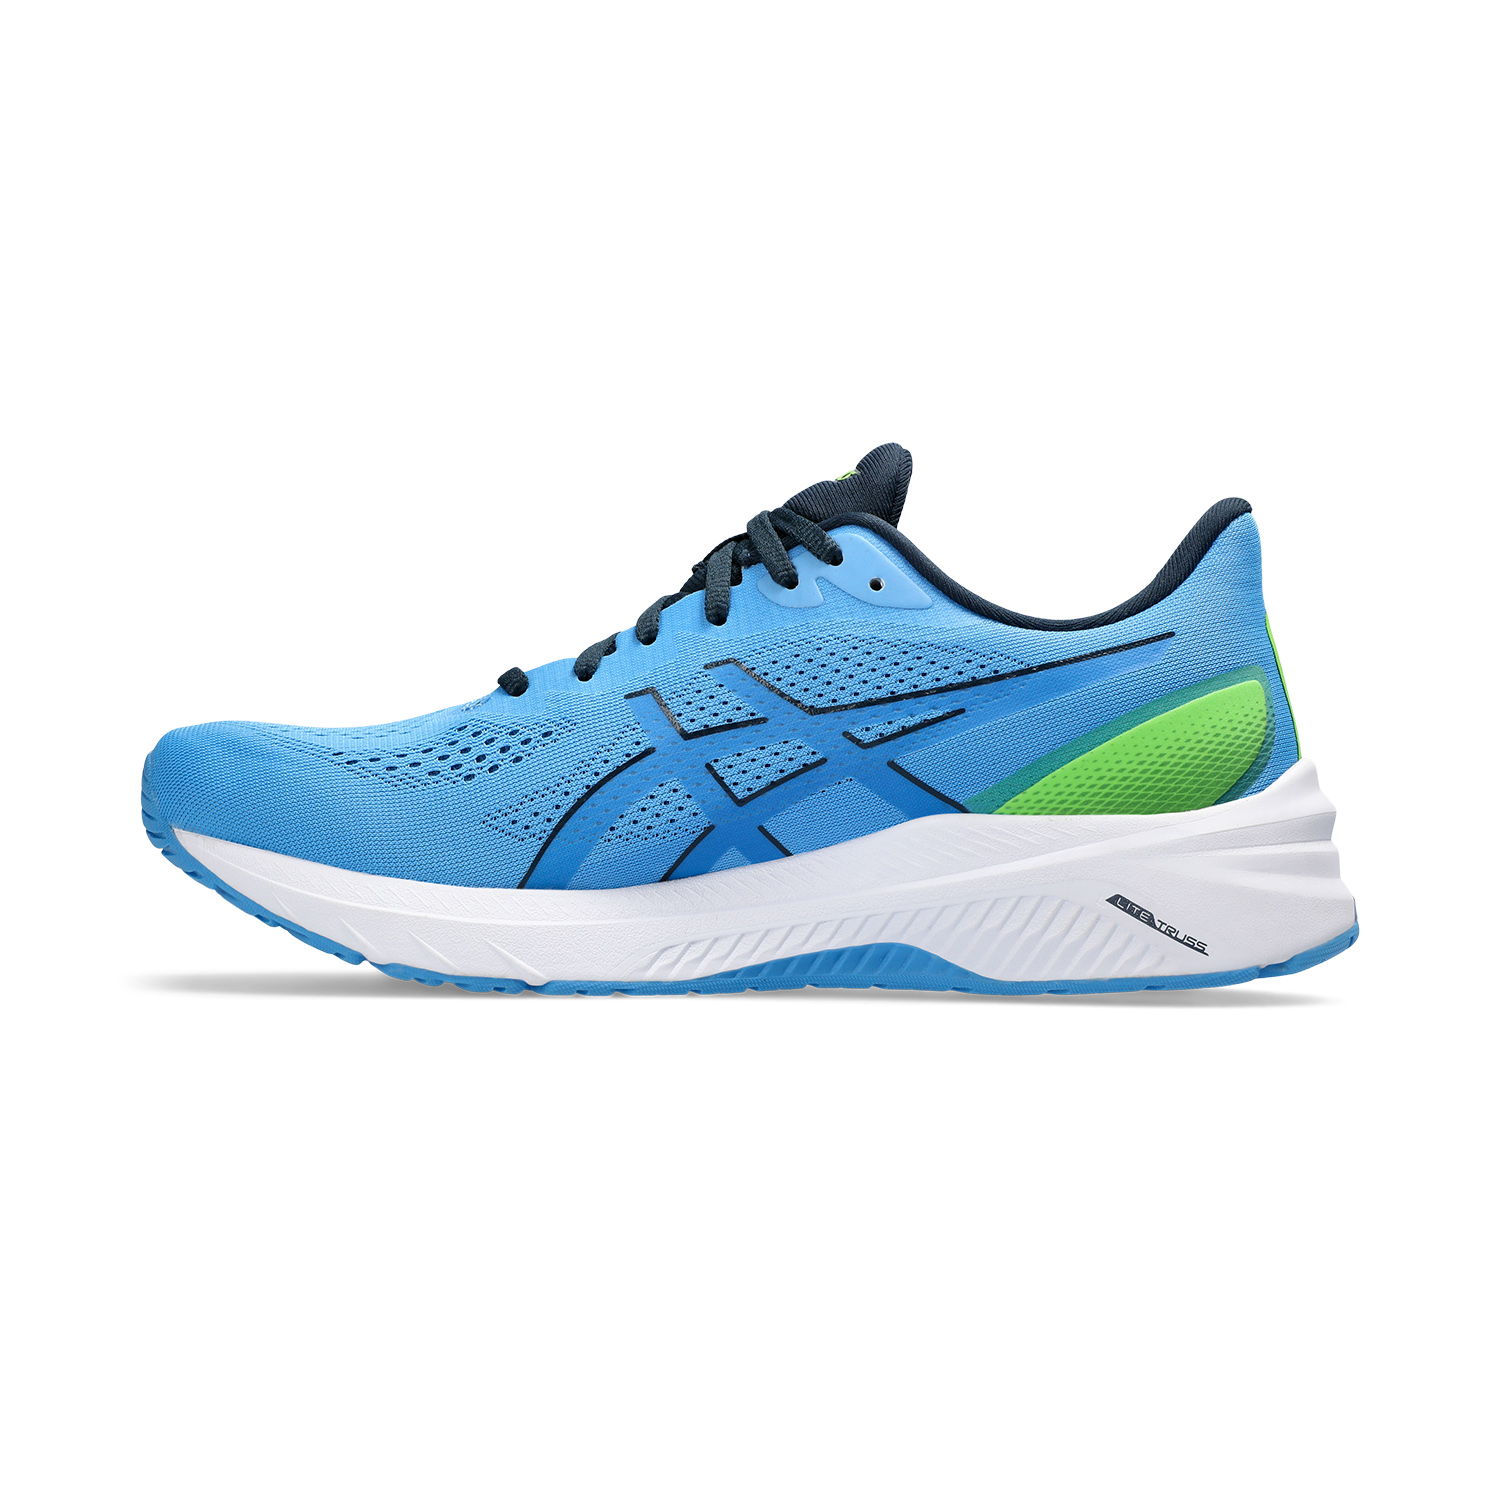 Asics GT 1000 12 - Waterscape/French Blue